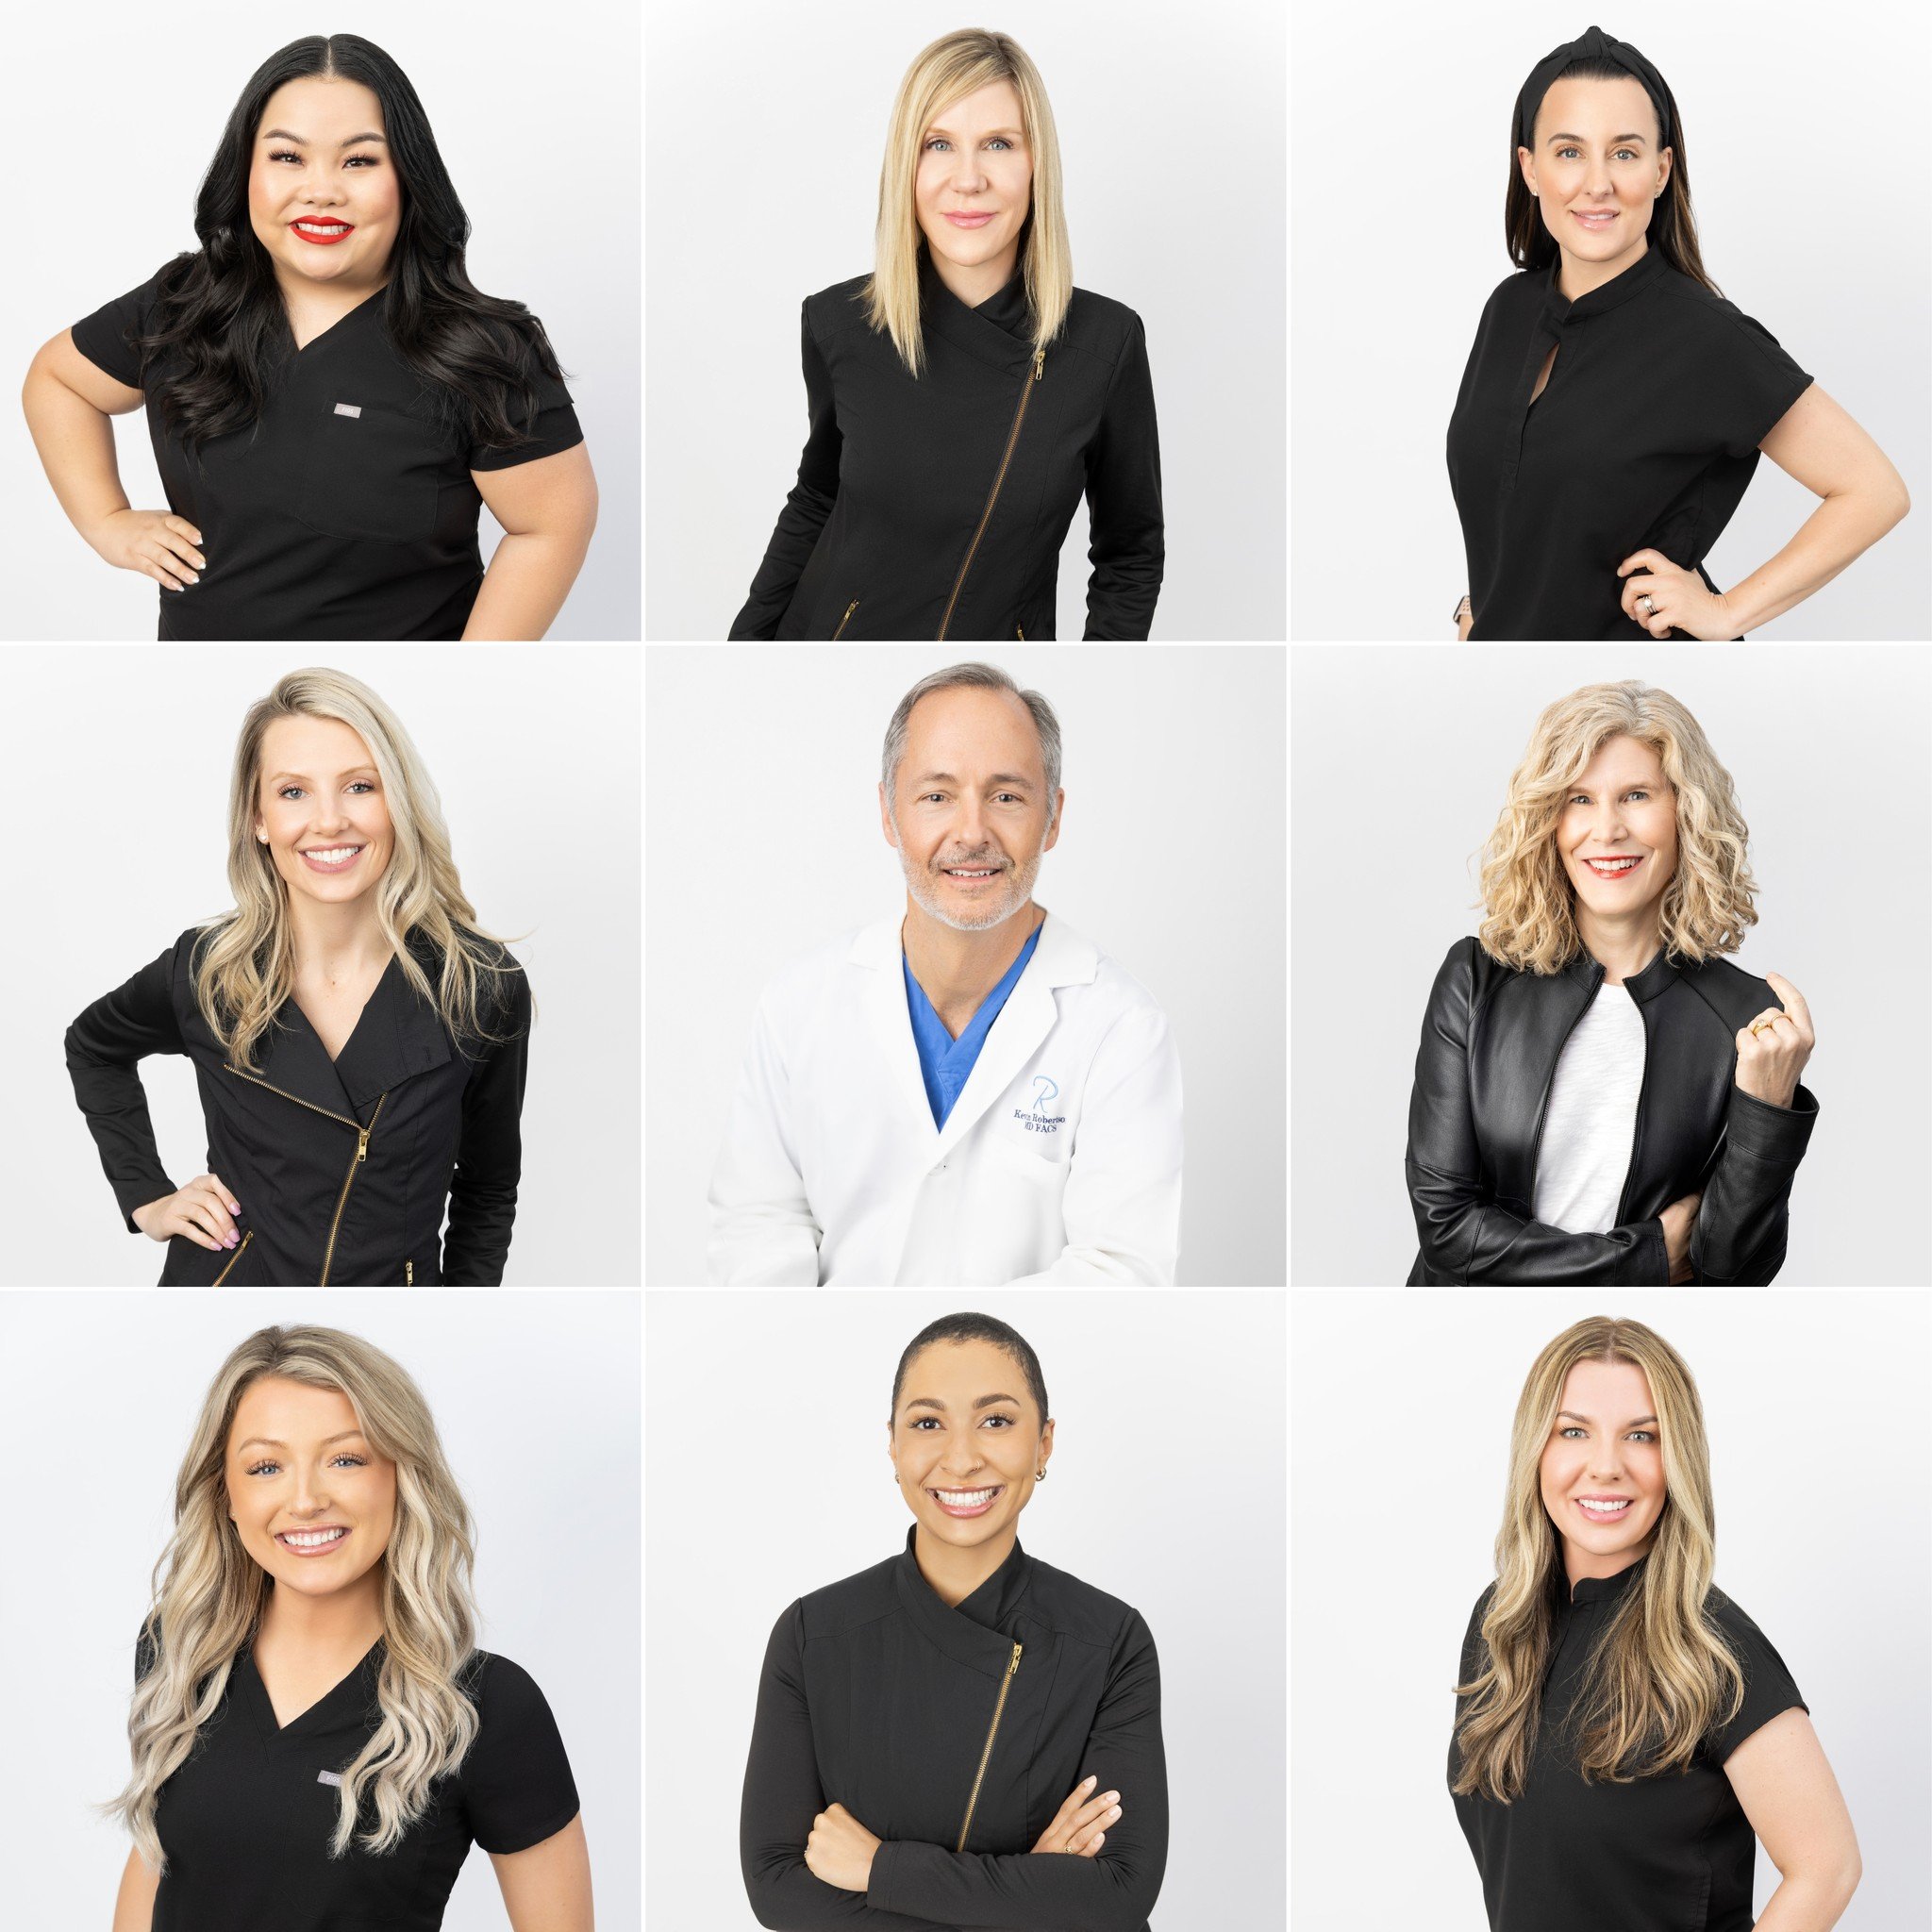 Team headshots with personality? Yes, please!

I loved working with @robertsoncosmeticcenter  to capture modern headshots of their entire team! We did a combination of individual portraits, plus a 3/4-body image of each person.

With two locations (M